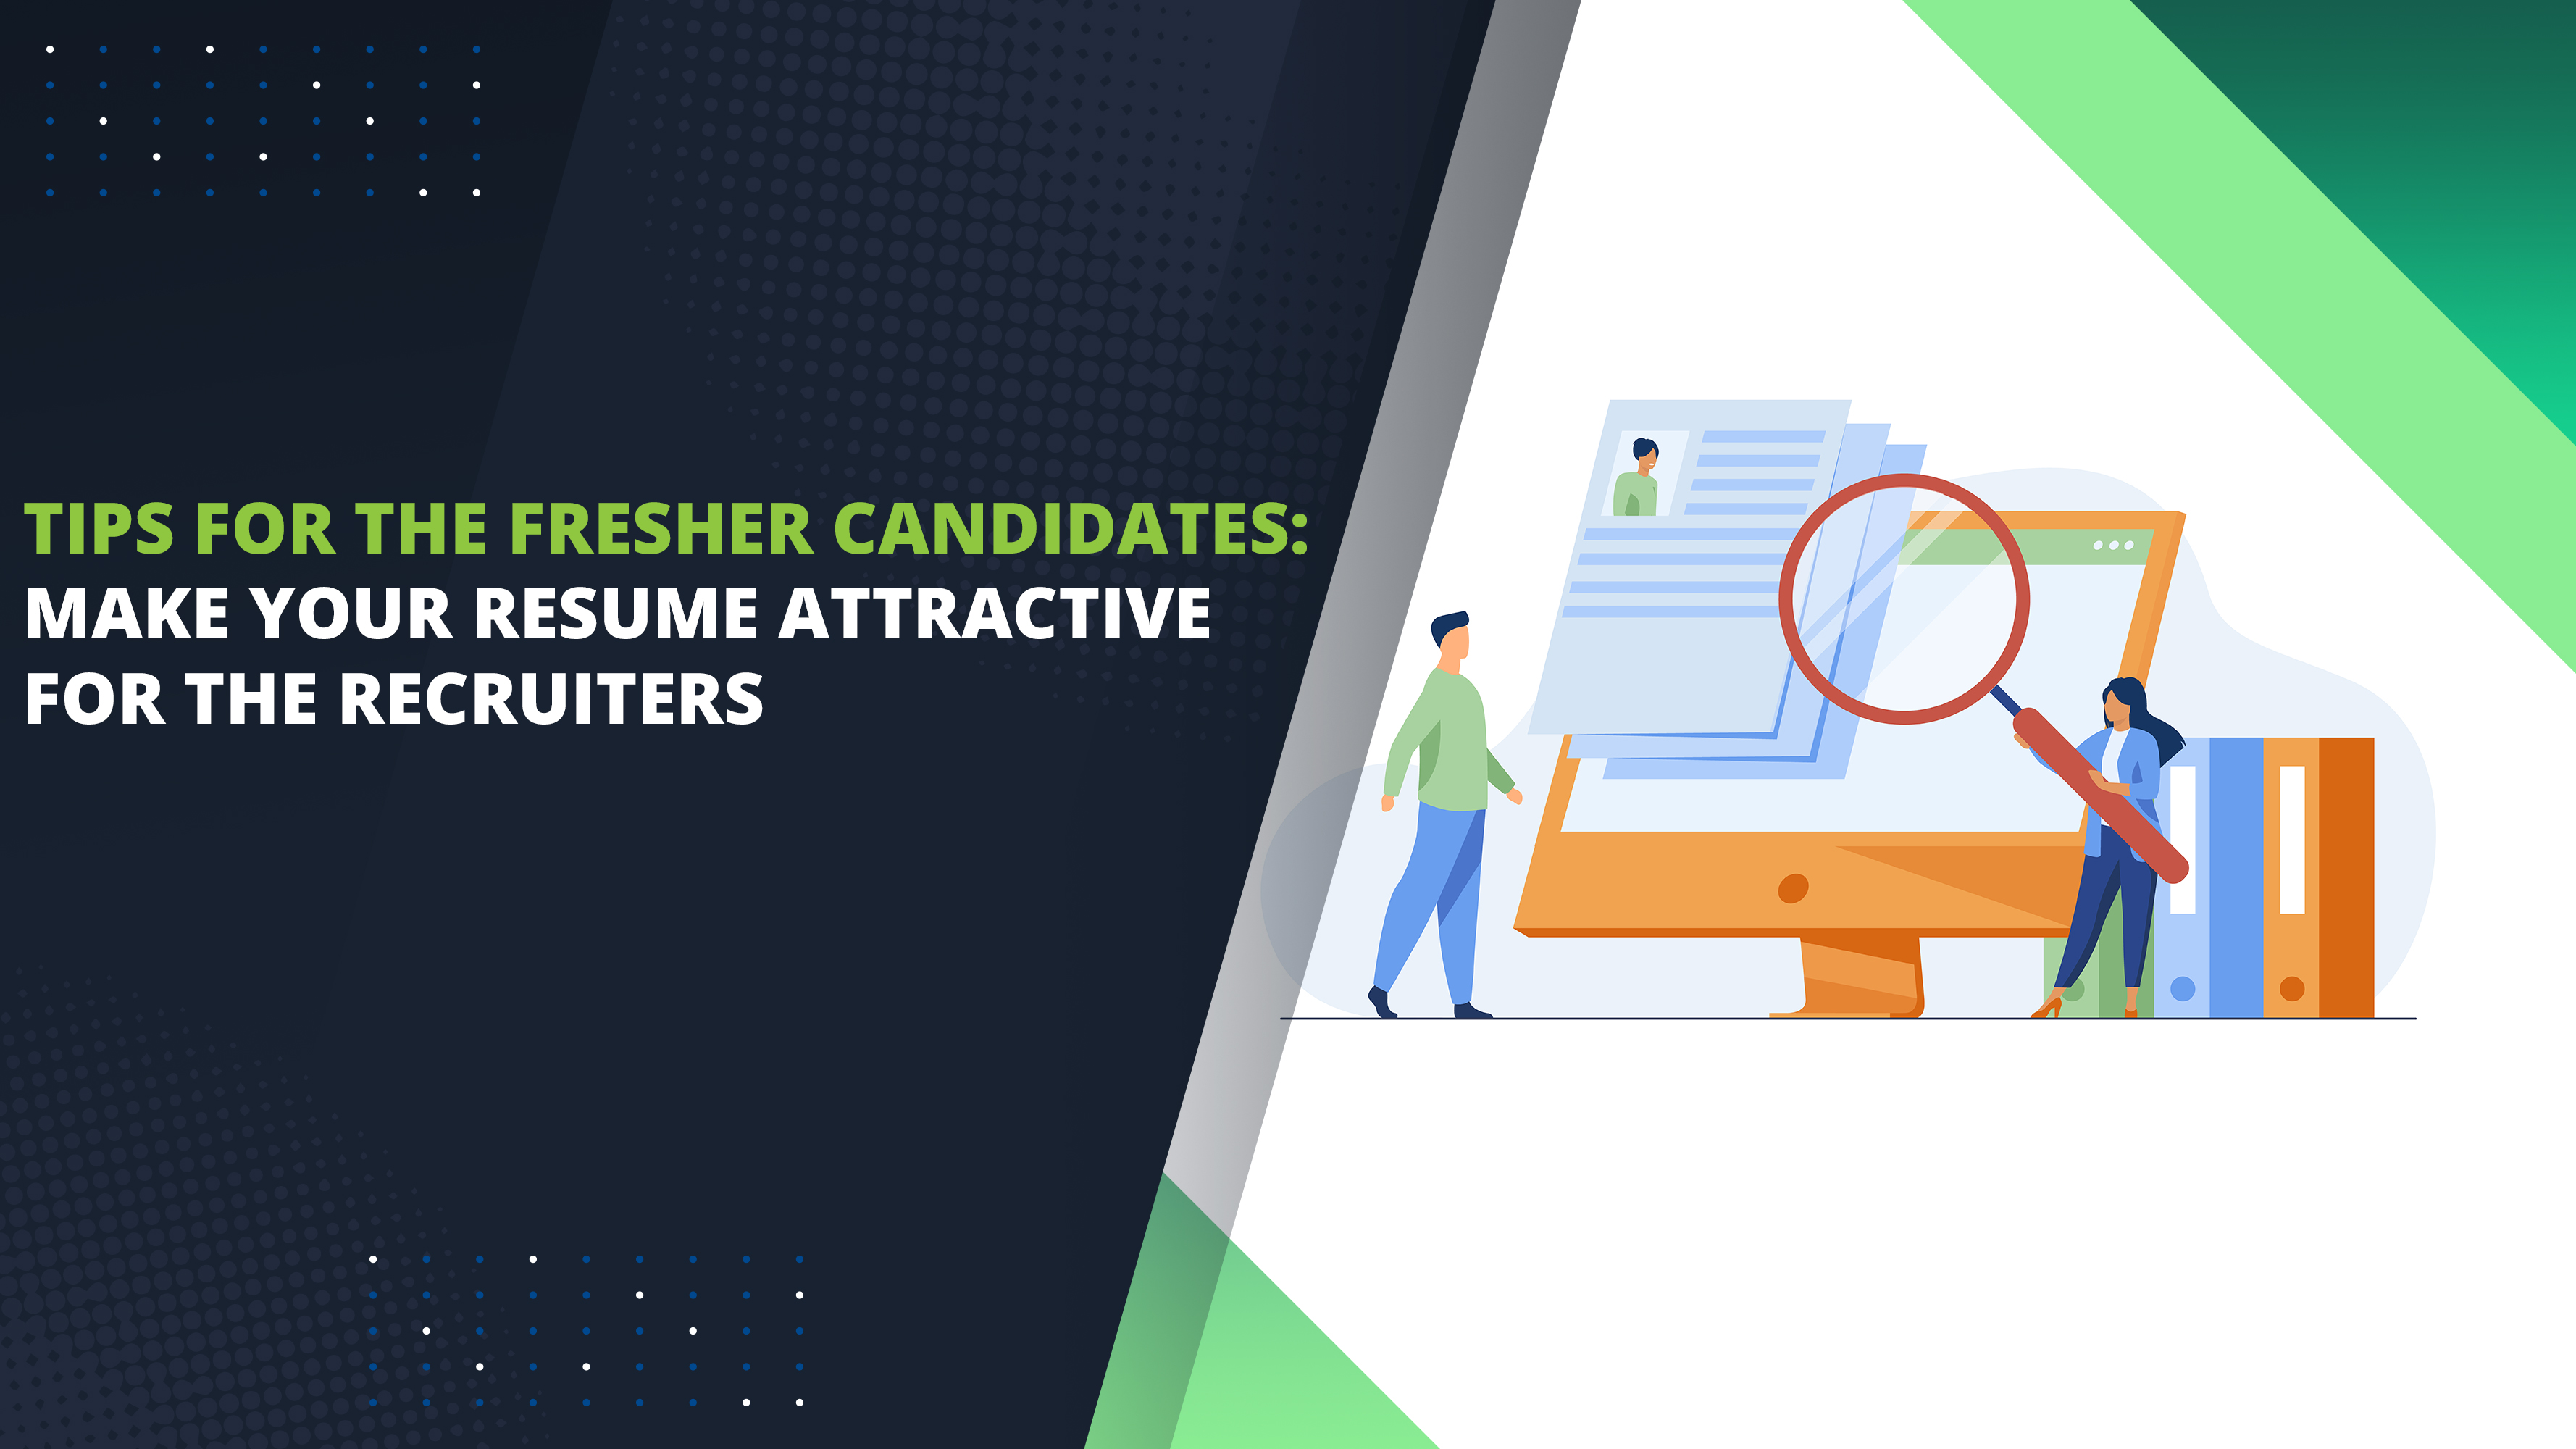 Tips for the Fresher Candidates: Make your Resume Attractive for the Recruiters